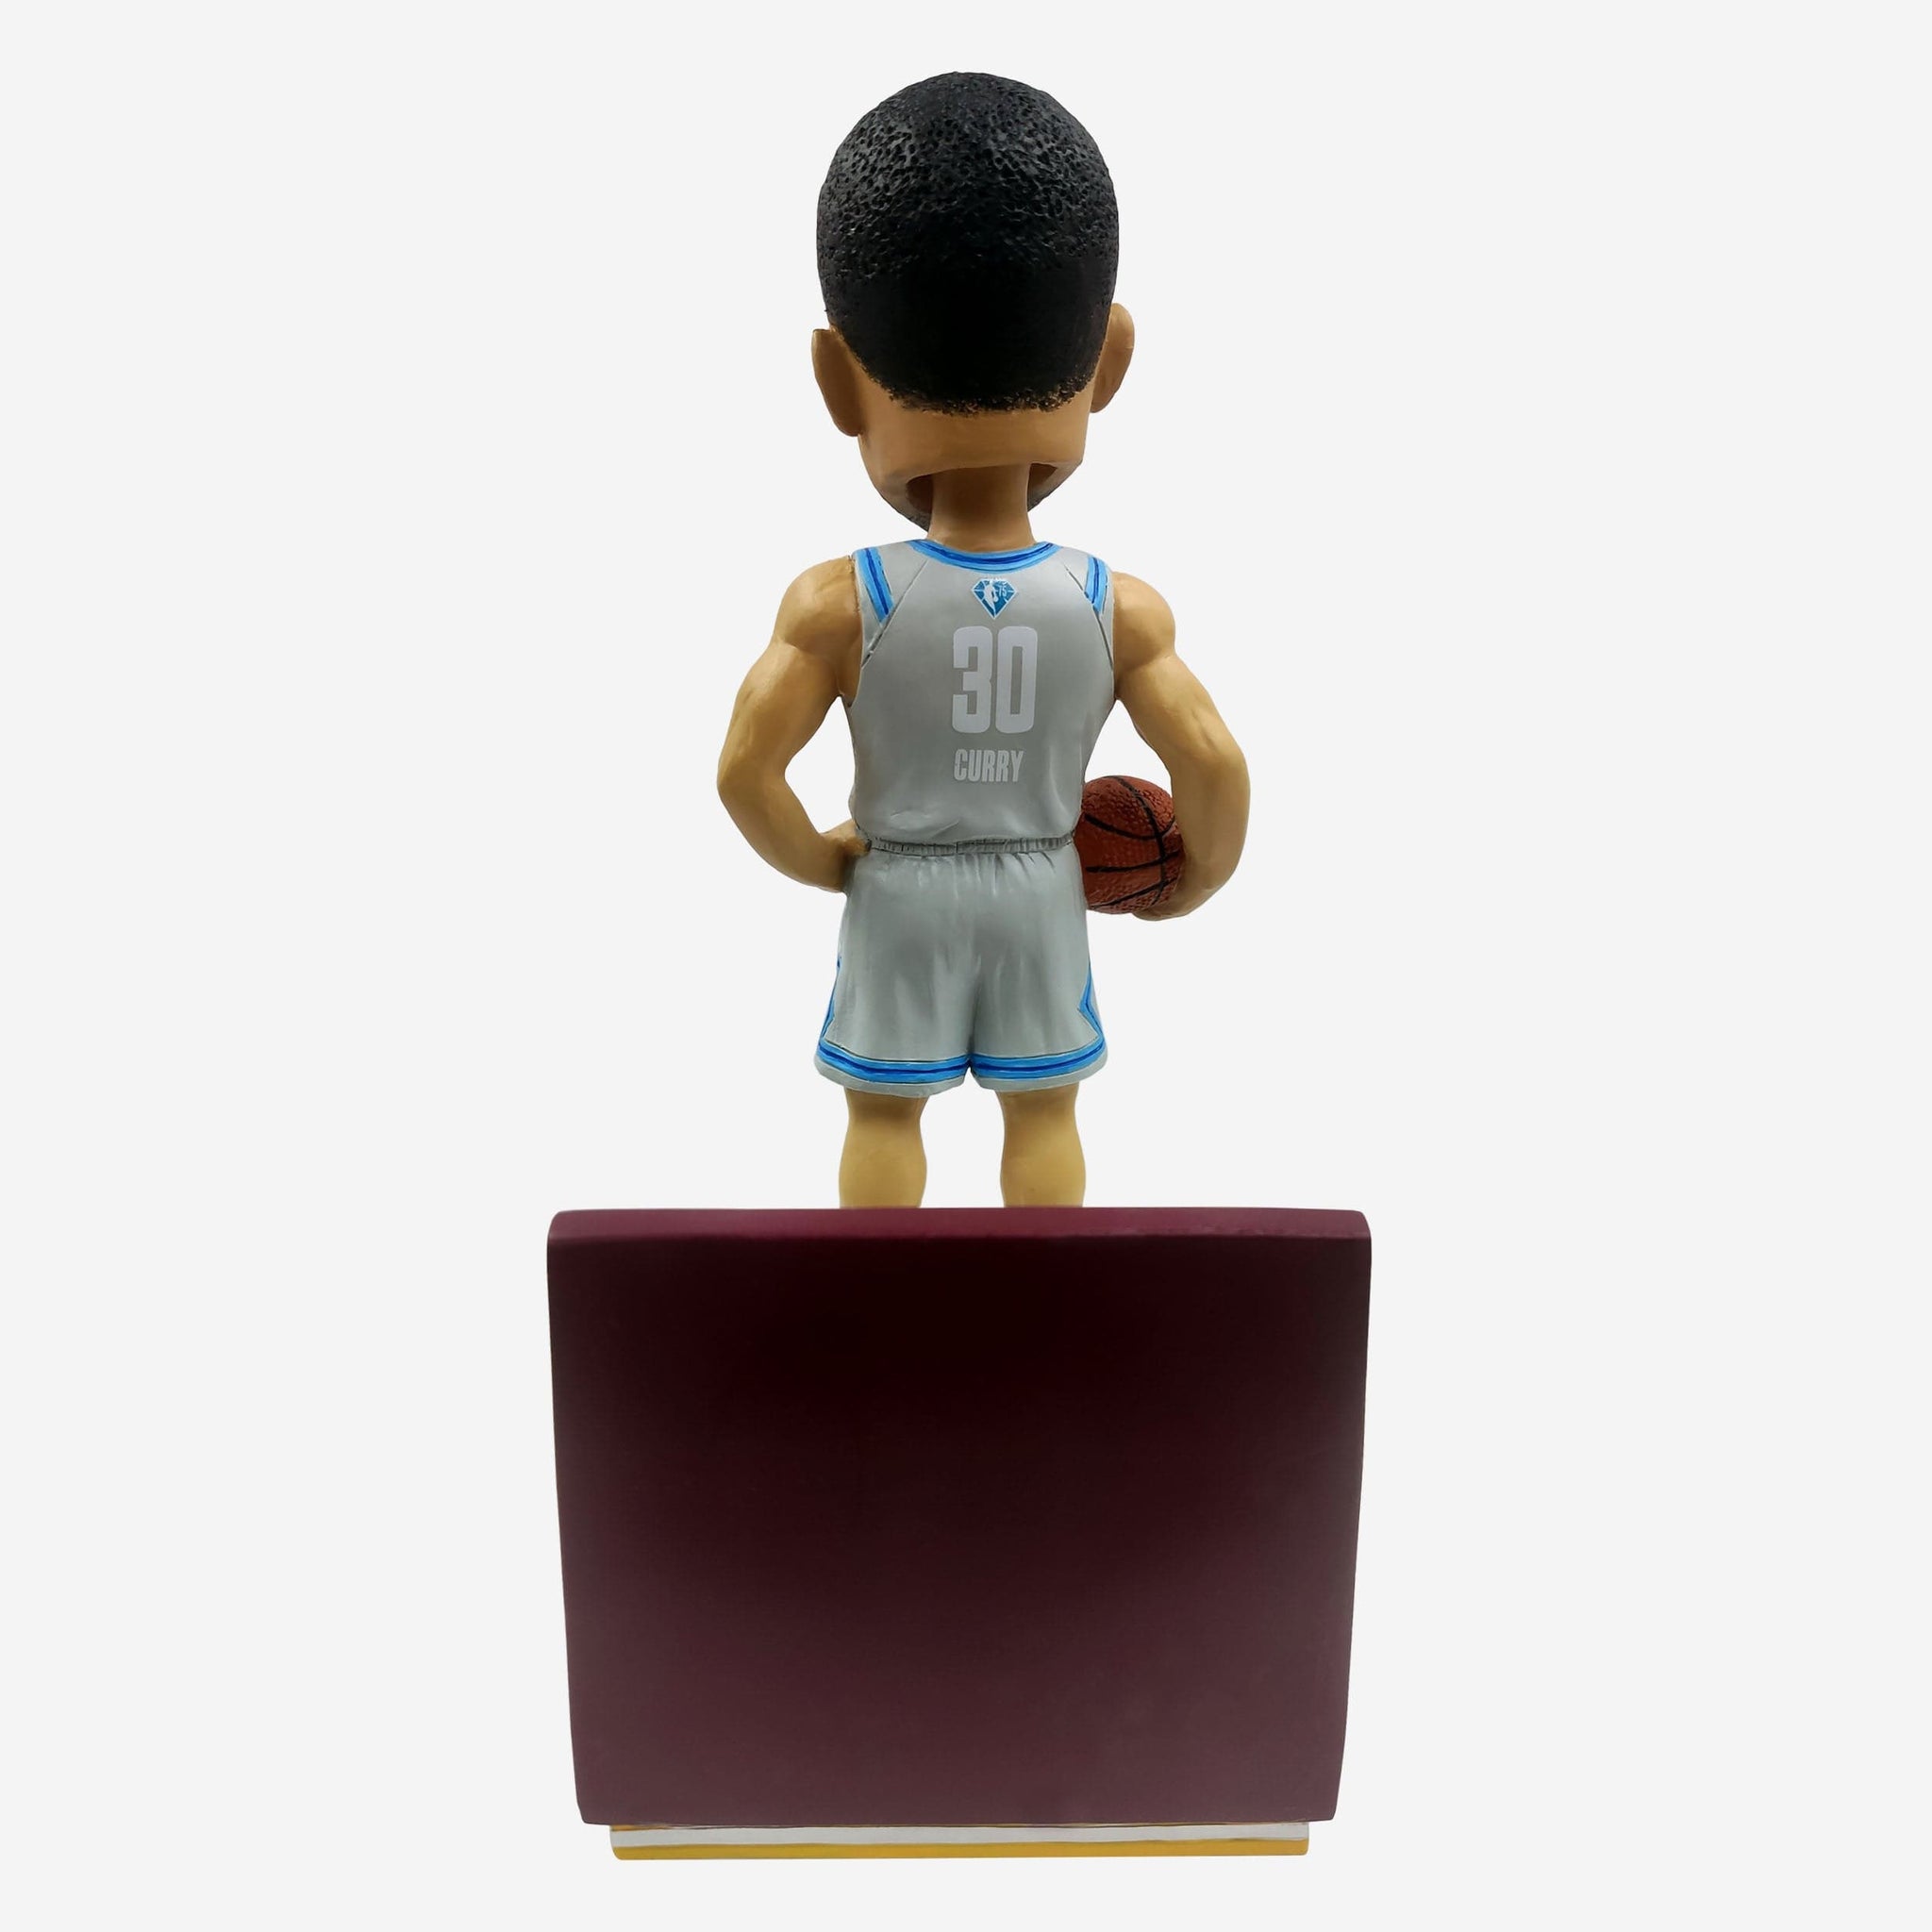 Steph Curry Golden State Warriors NBA Japan Games 2022 Bobblehead FOCO